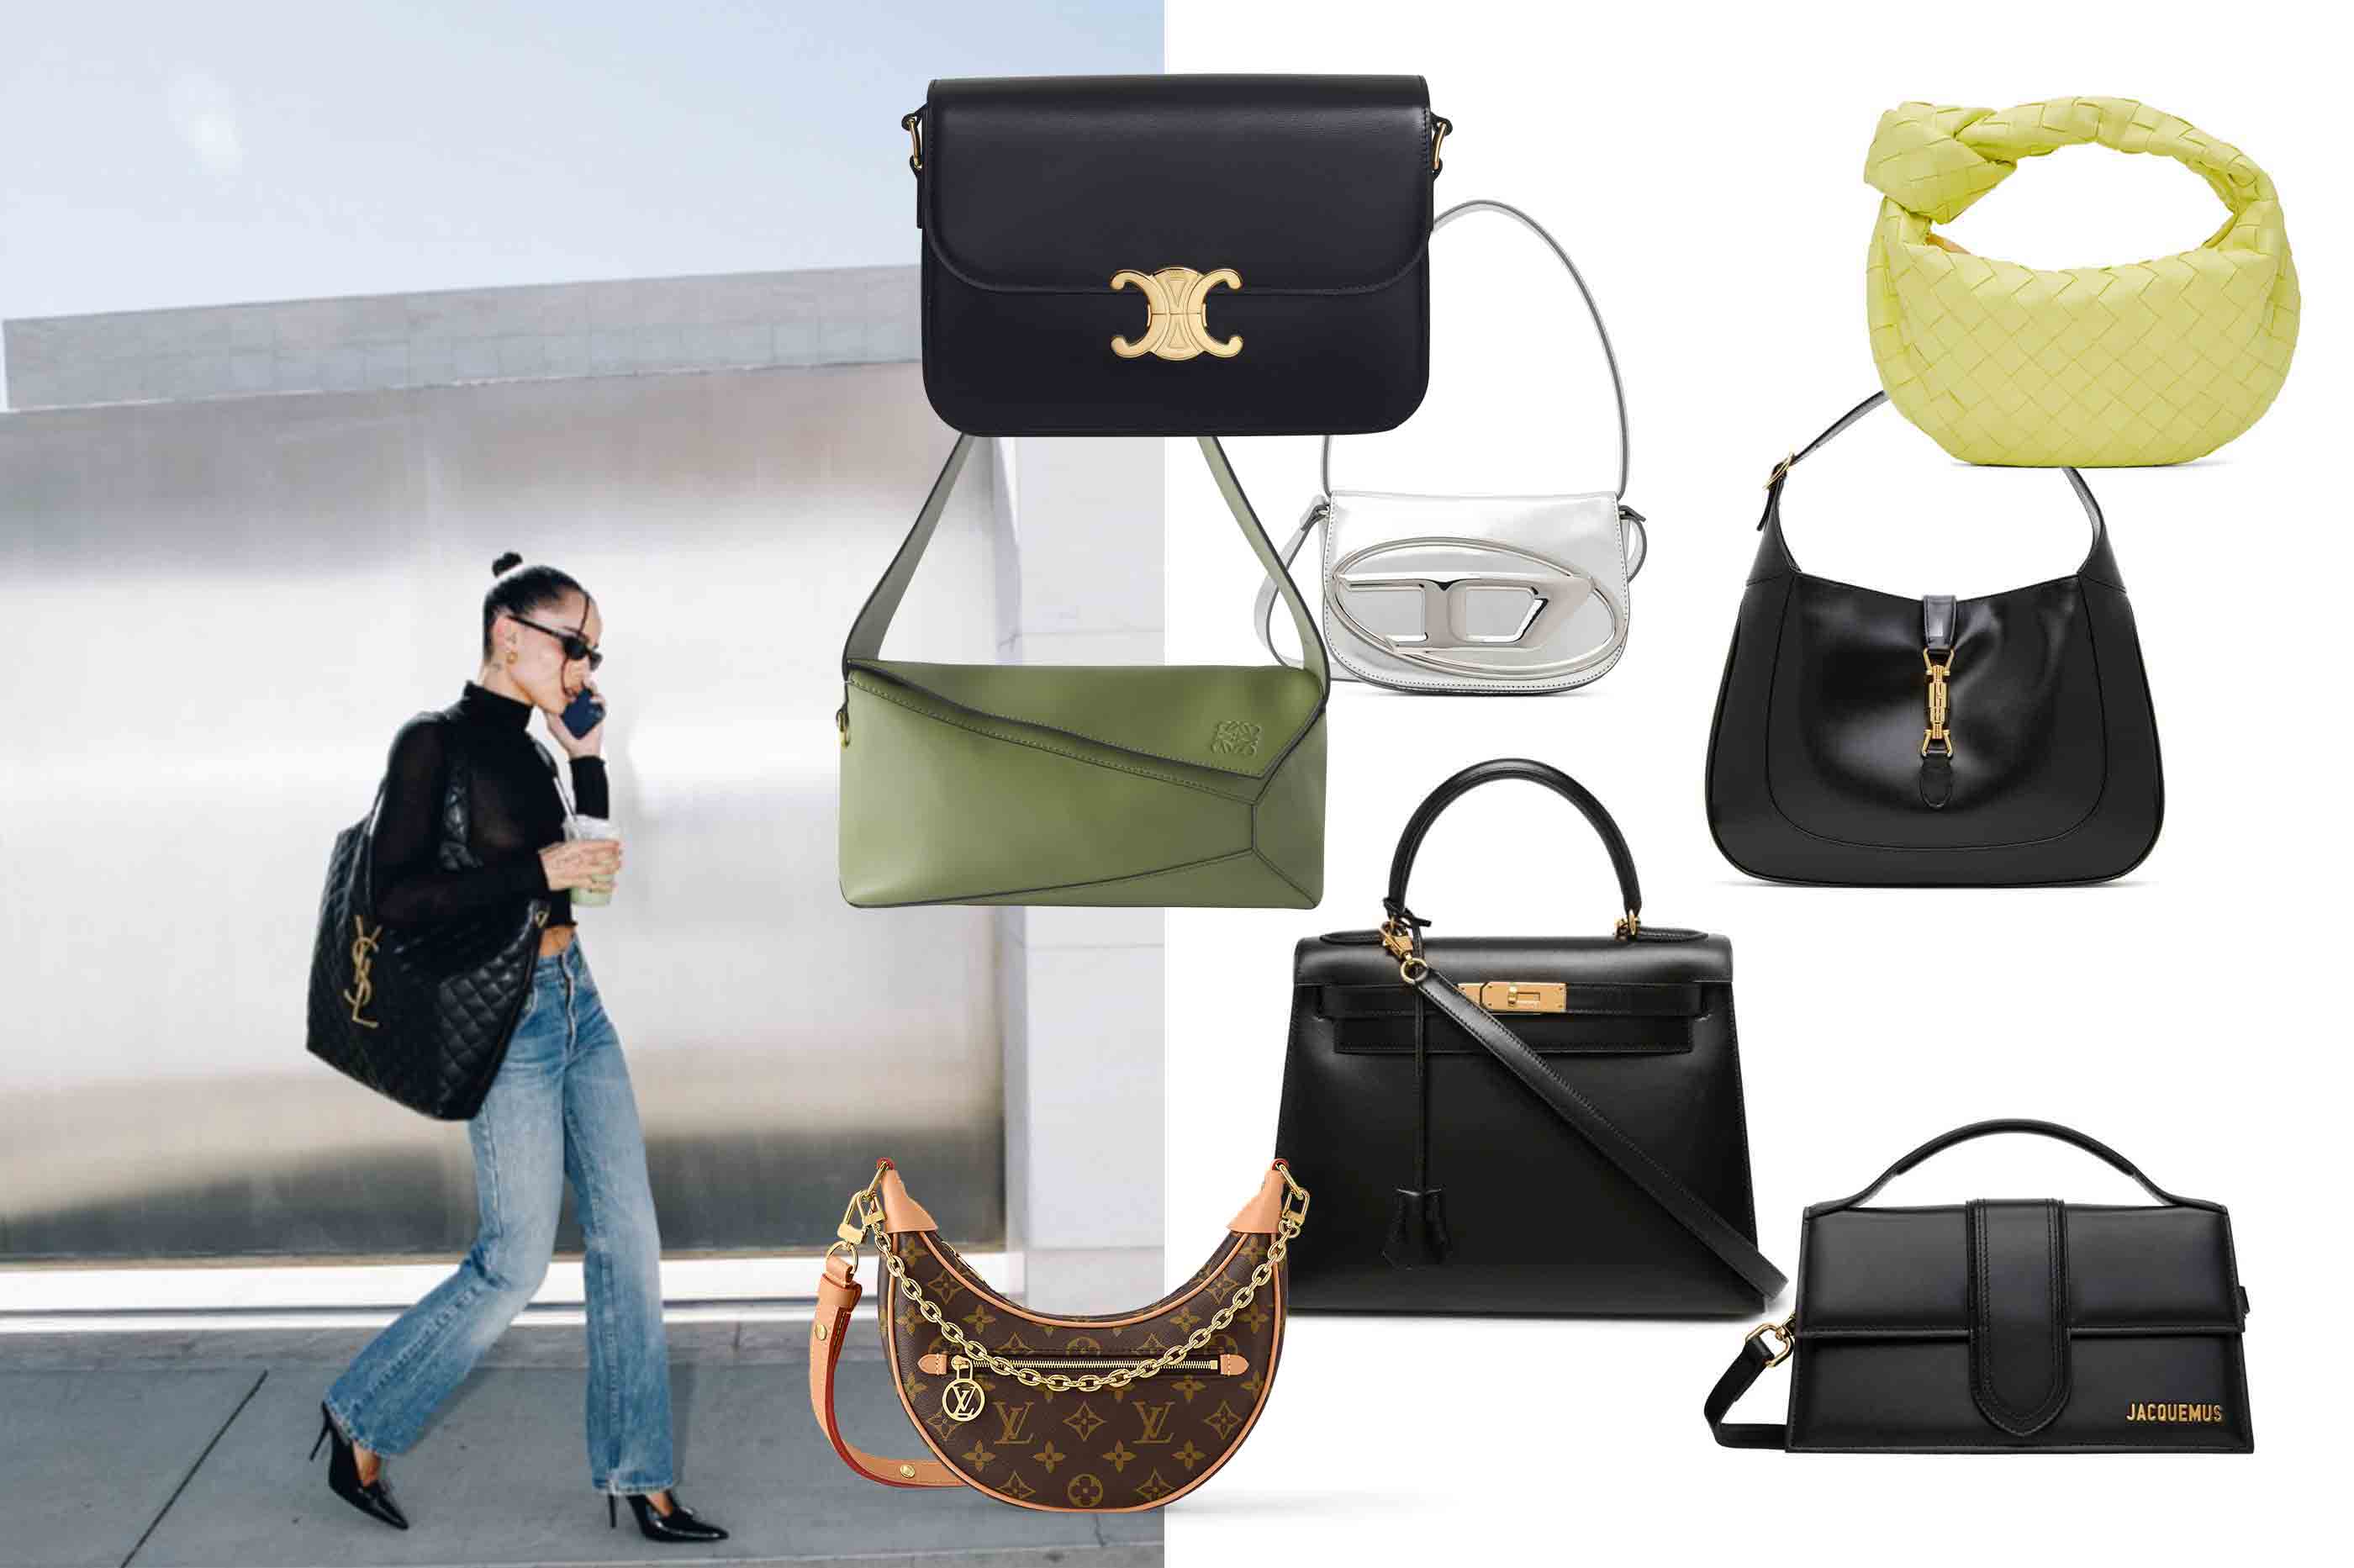 7 Designer Bags That Will Never Go Out of Style